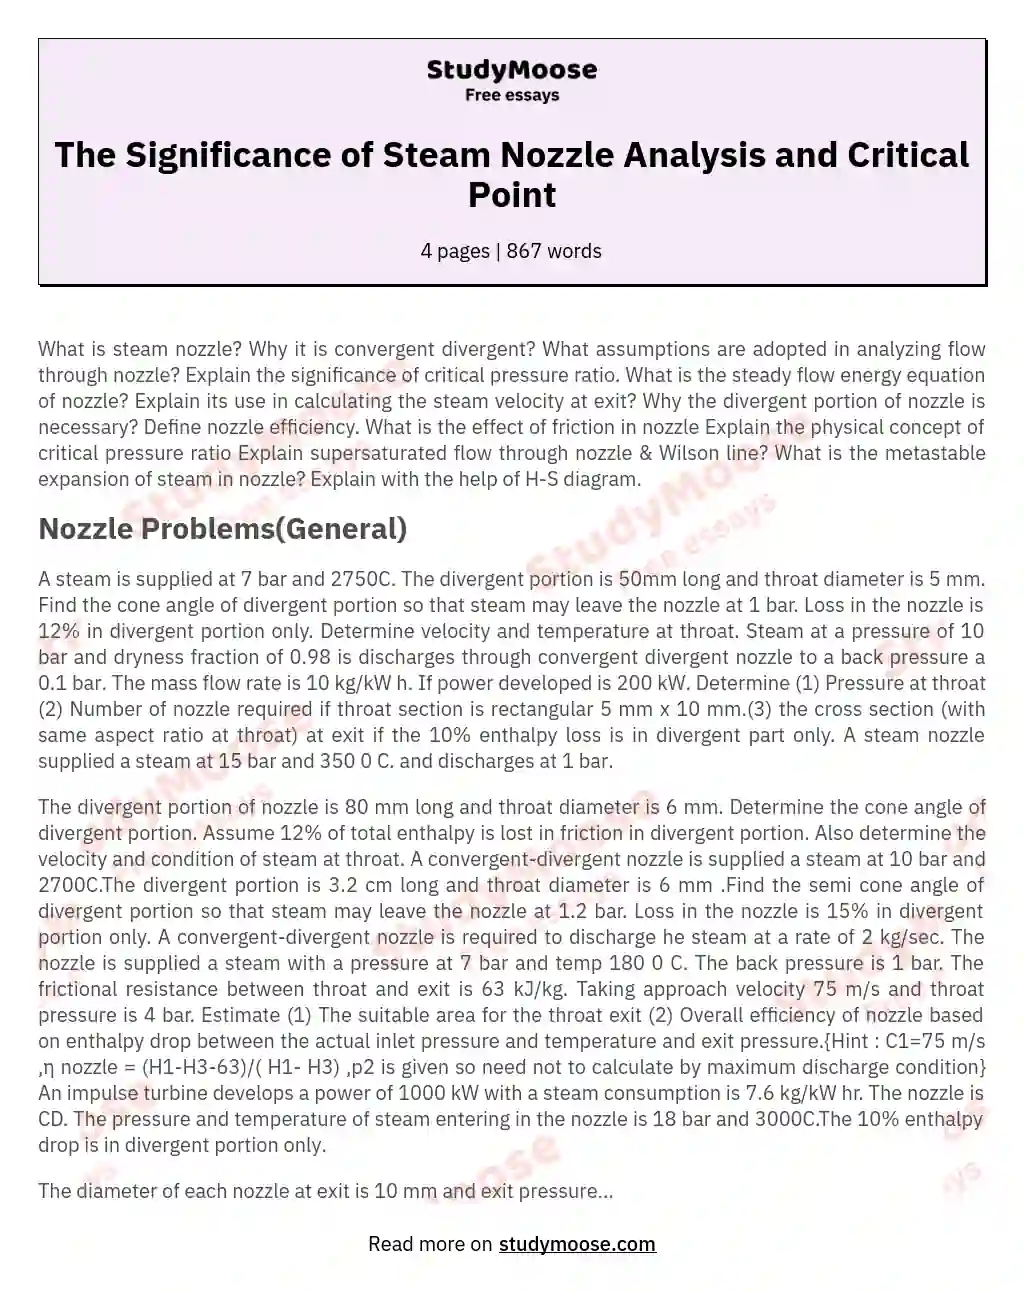 The Significance of Steam Nozzle Analysis and Critical Point essay